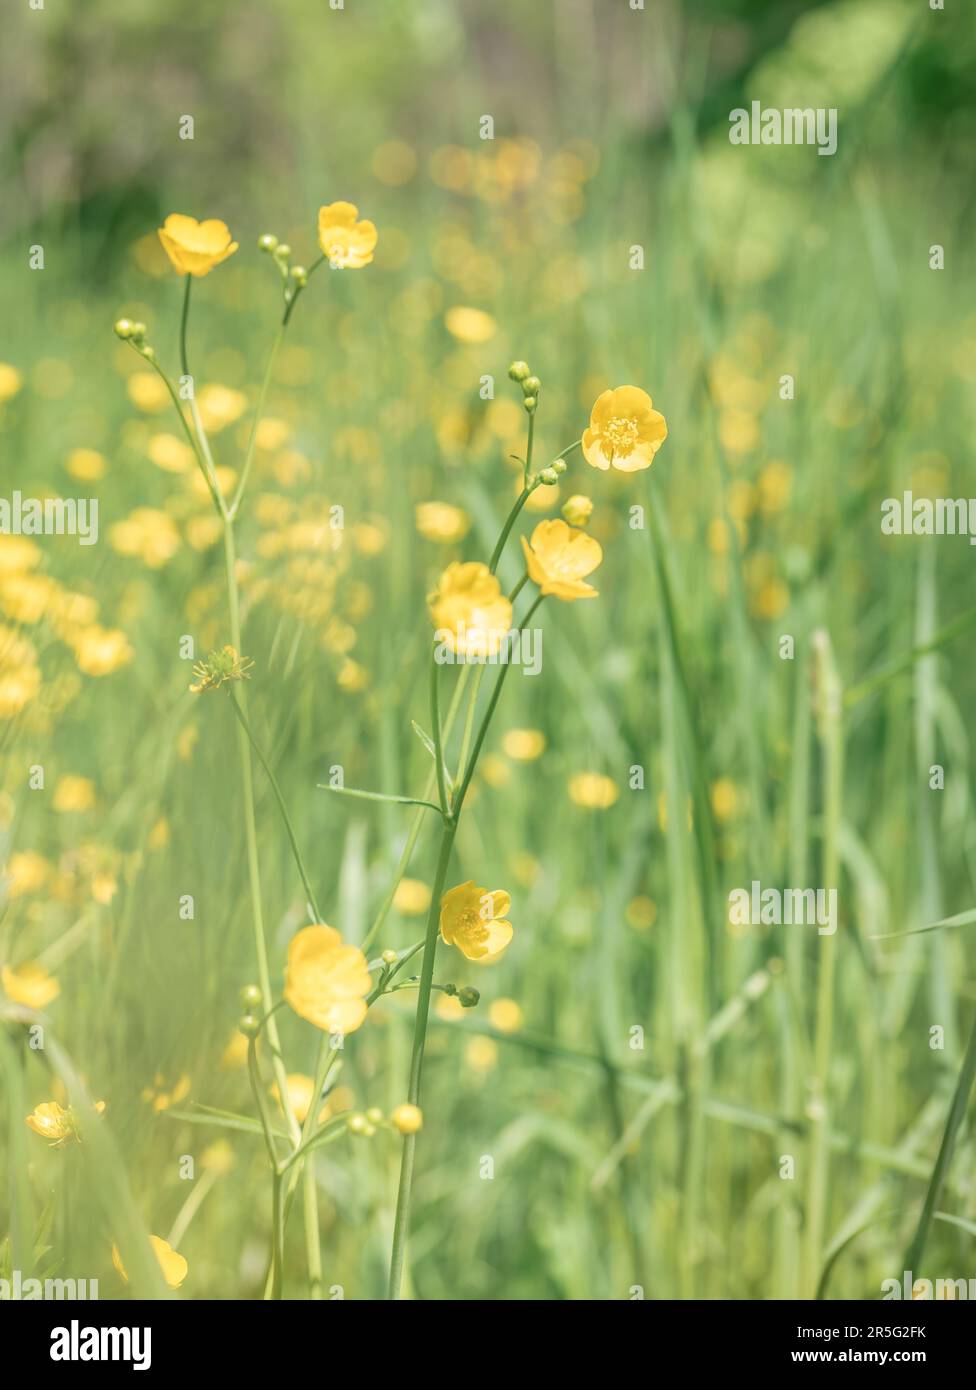 Spring landscape with a field full of small yellow Ranunculus repens buttercup flowers. Stock Photo